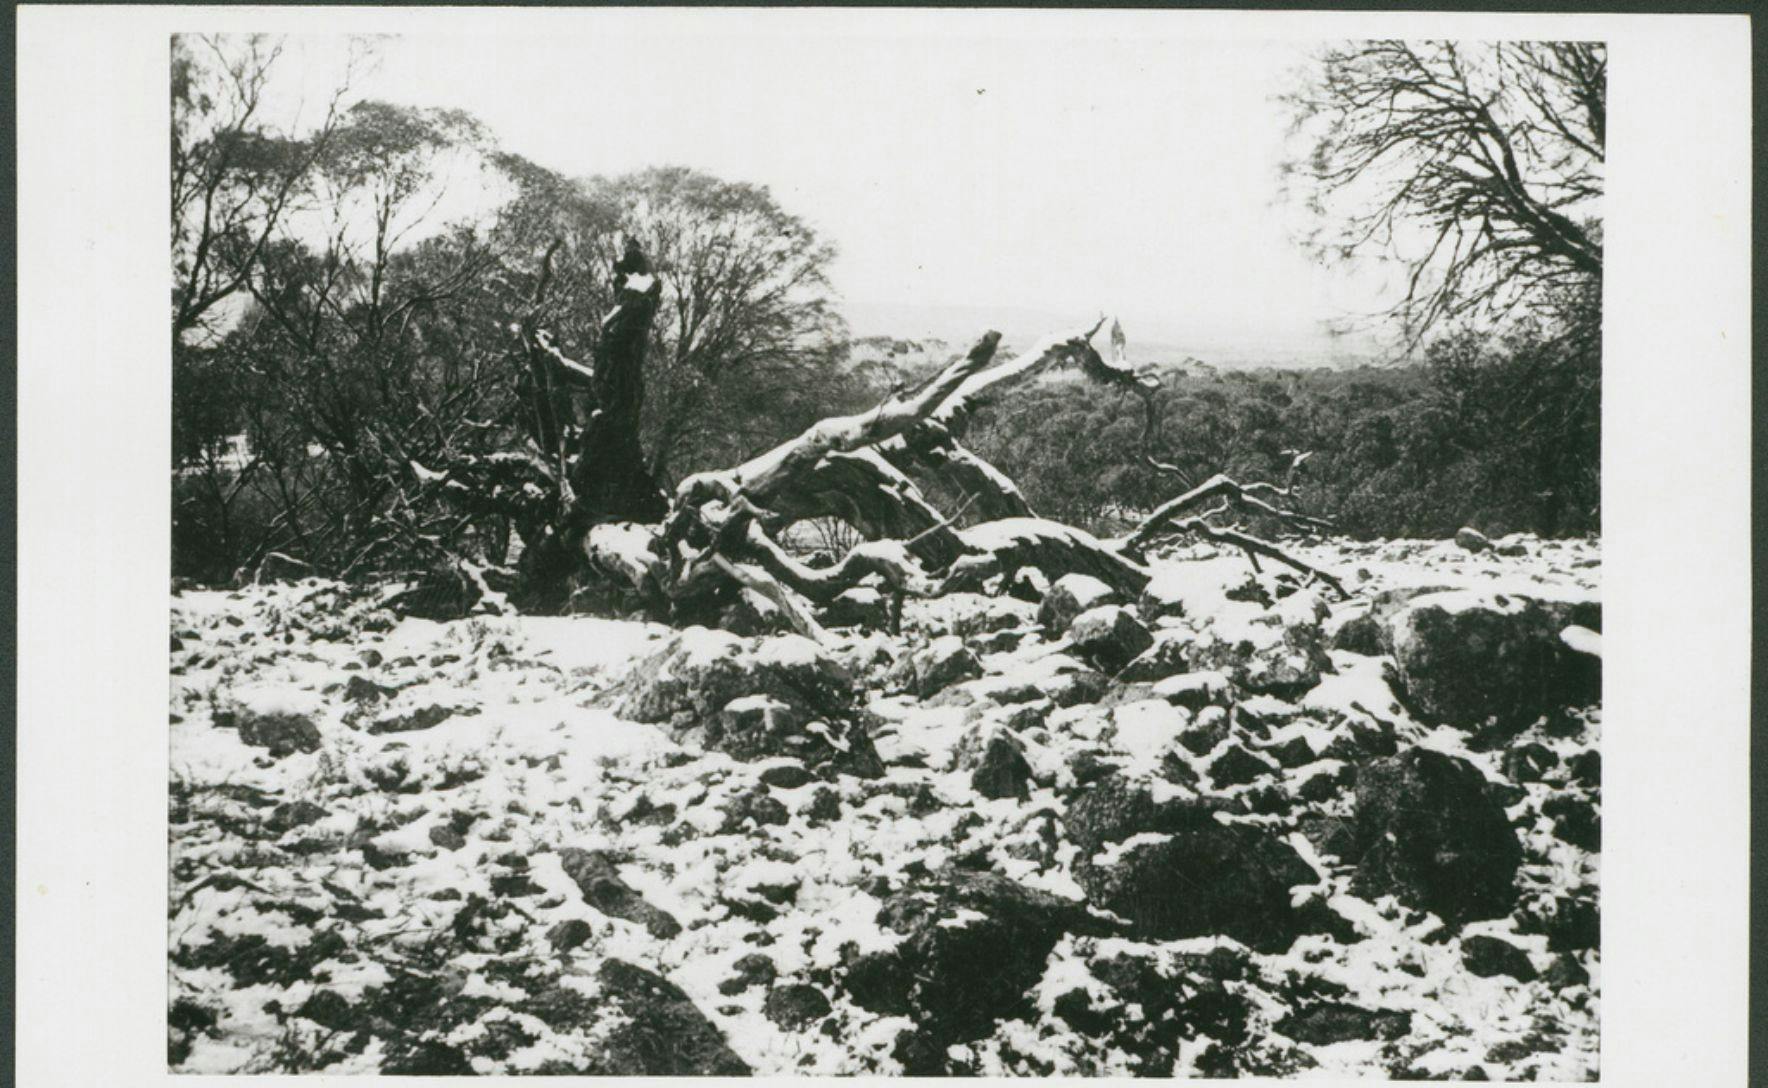 A black and white photograph of a rocky landscape and a fallen tree covered in snow.